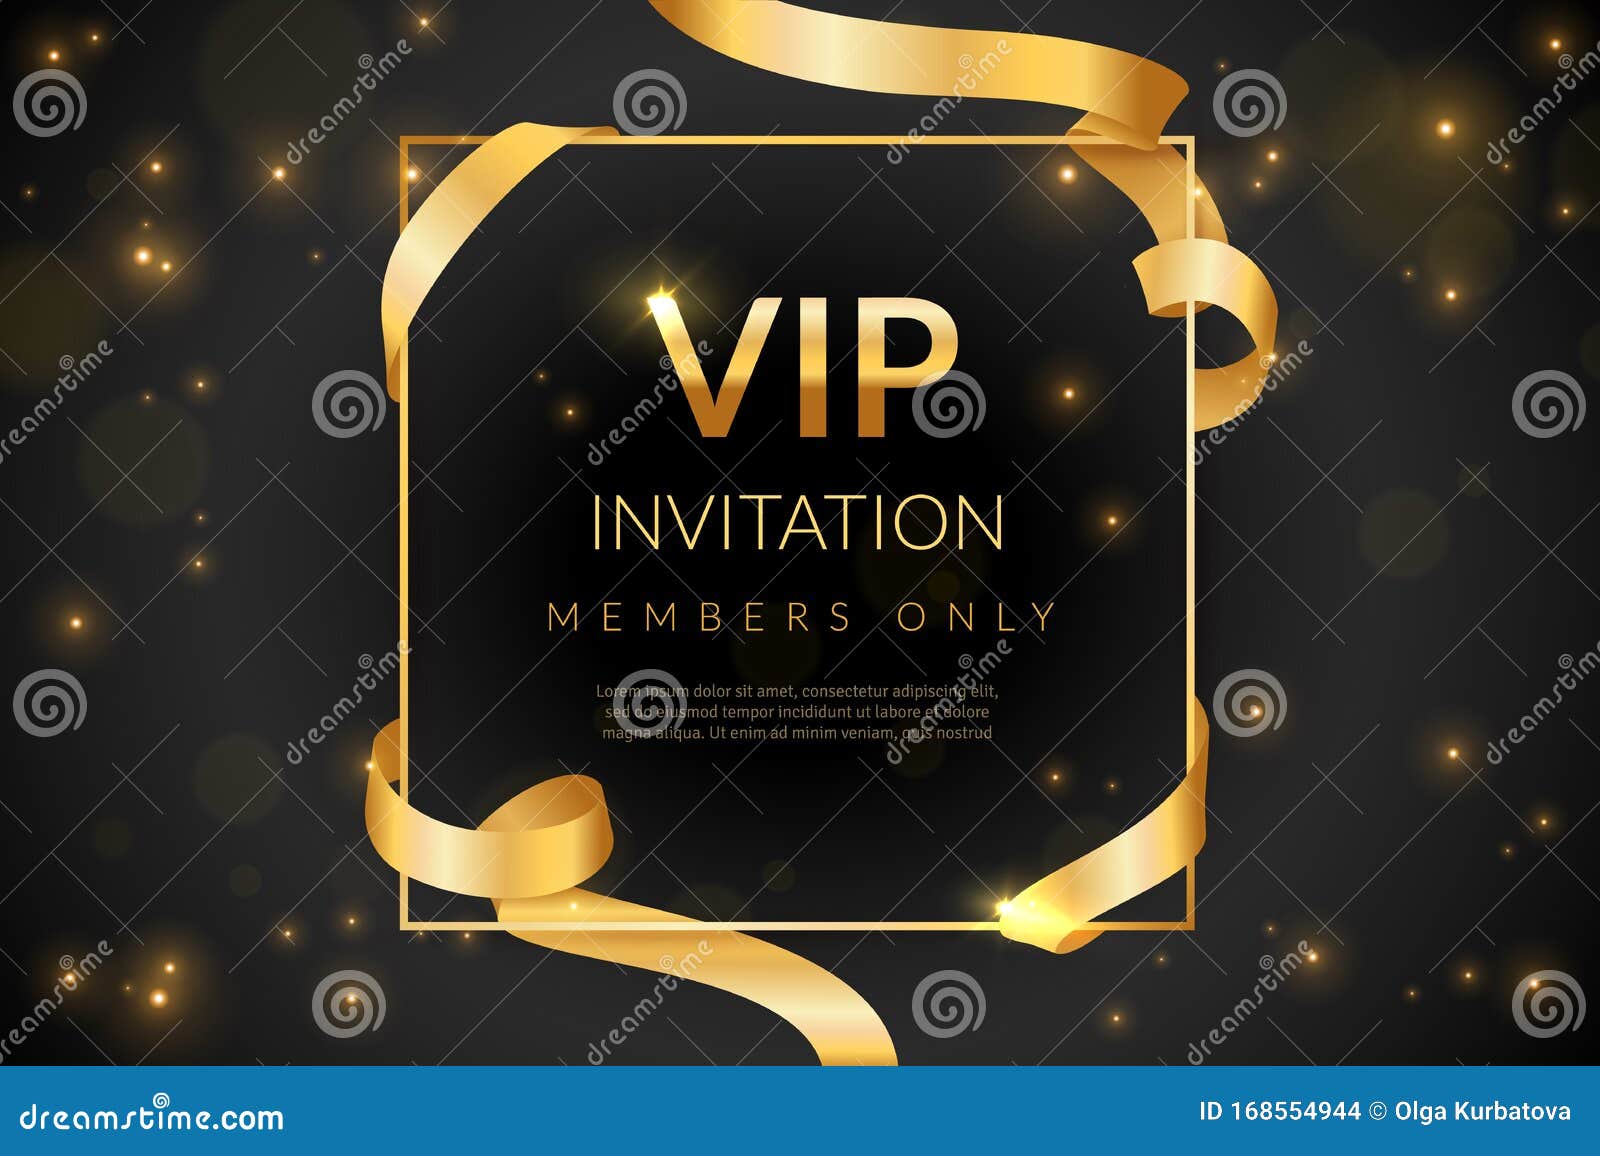 vip. luxury gift card, vip invitation coupon, certificate with gold text, exclusive and elegant logo membership in